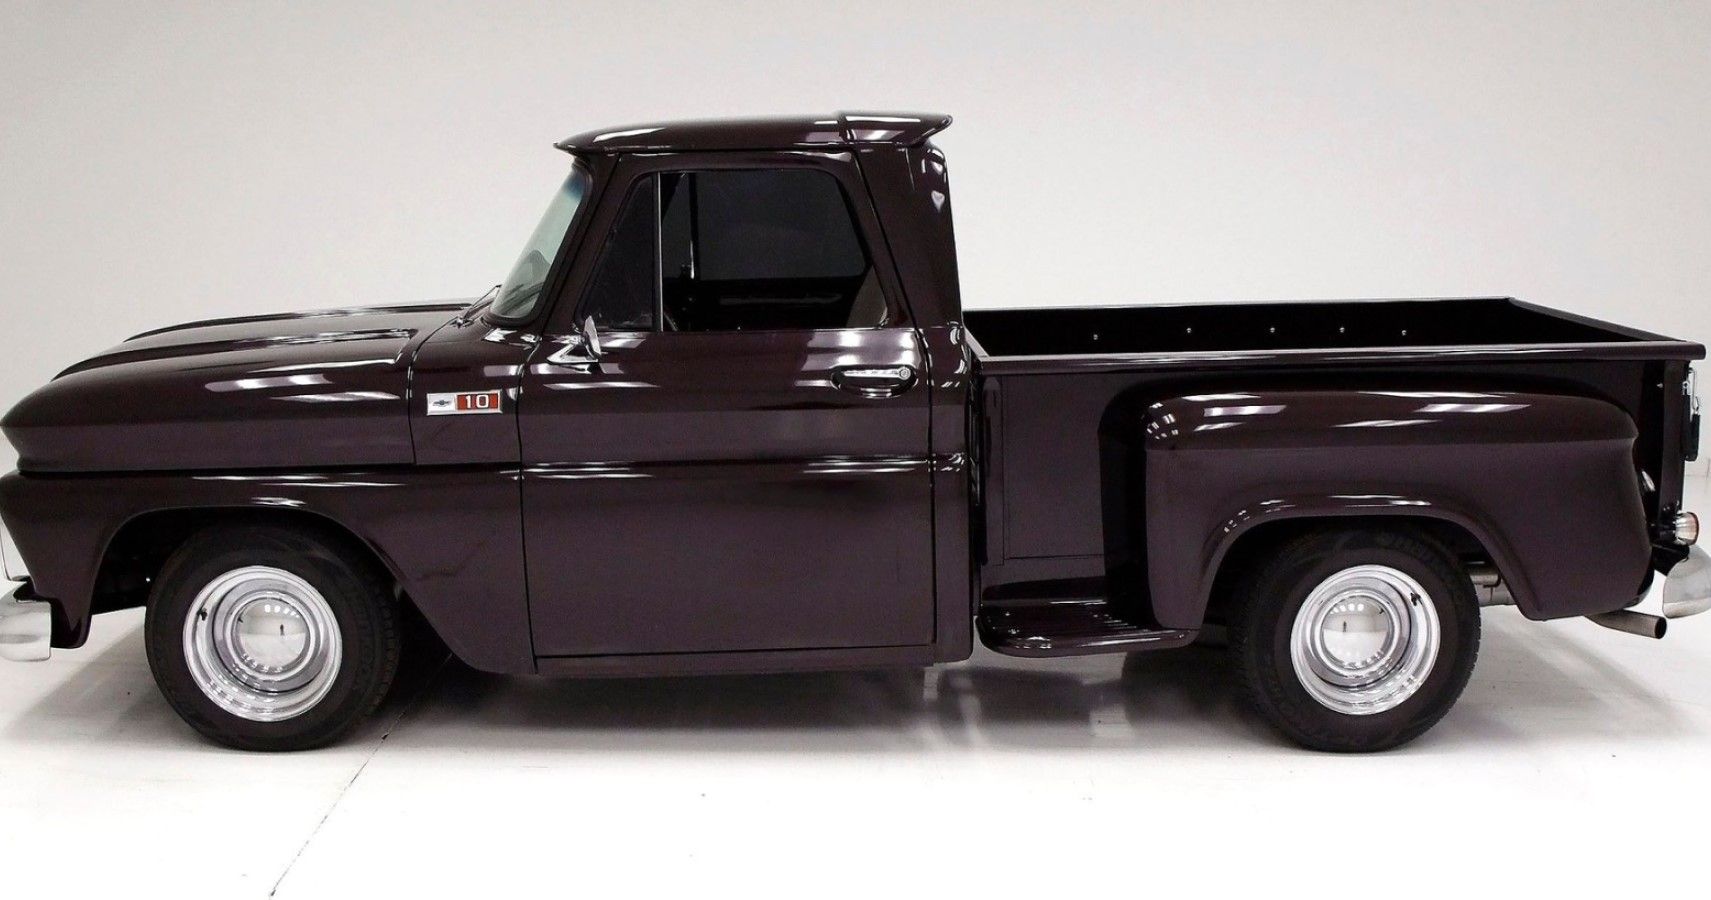 1965 Chevrolet C10 side view